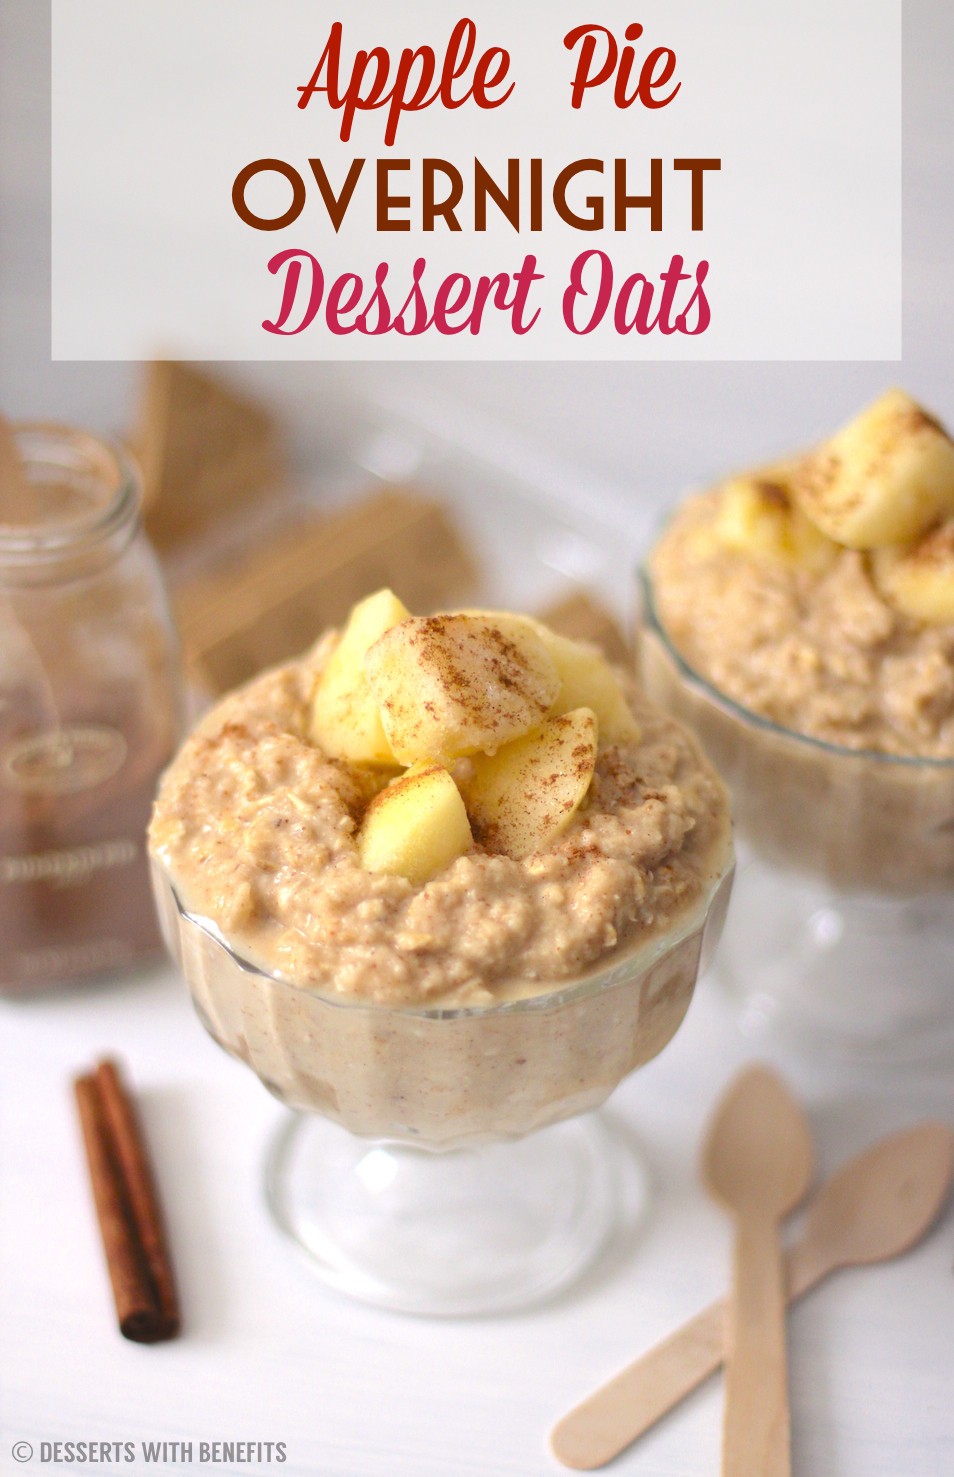 Quick And Easy Apple Desserts
 Healthy Apple Pie Overnight Dessert Oats GF V